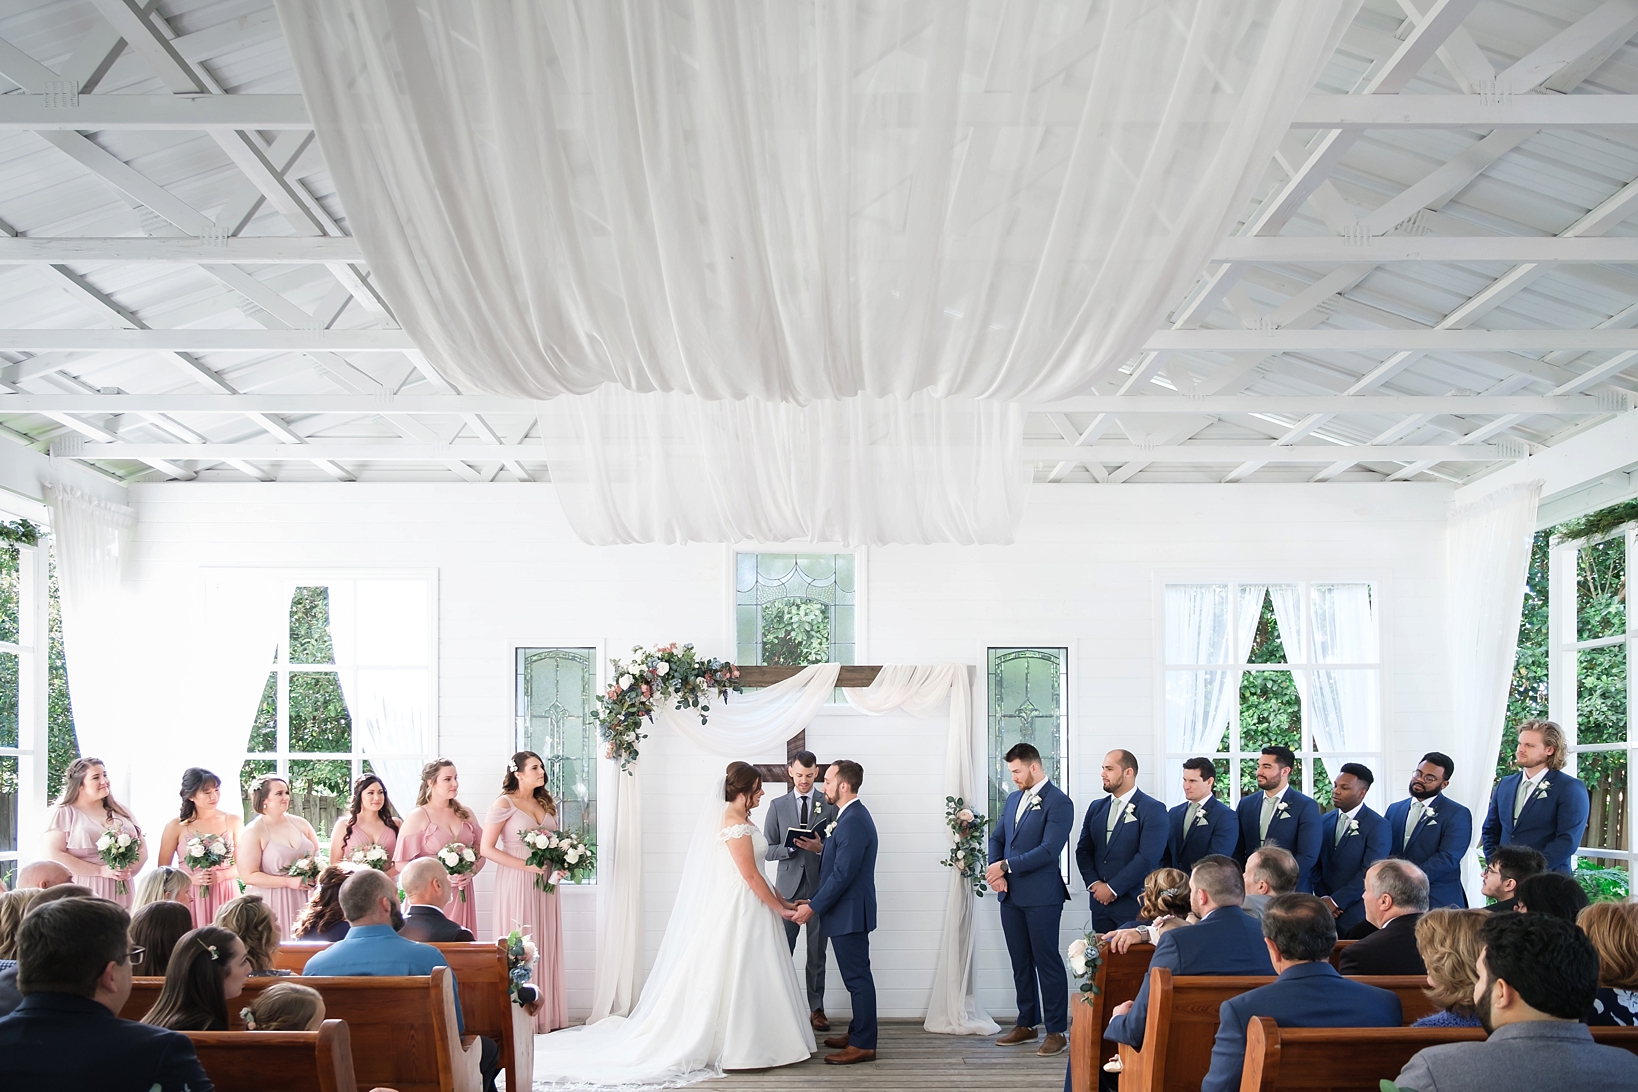 A wide shot of the entire wedding ceremony showing the entire wedding party standing at the altar